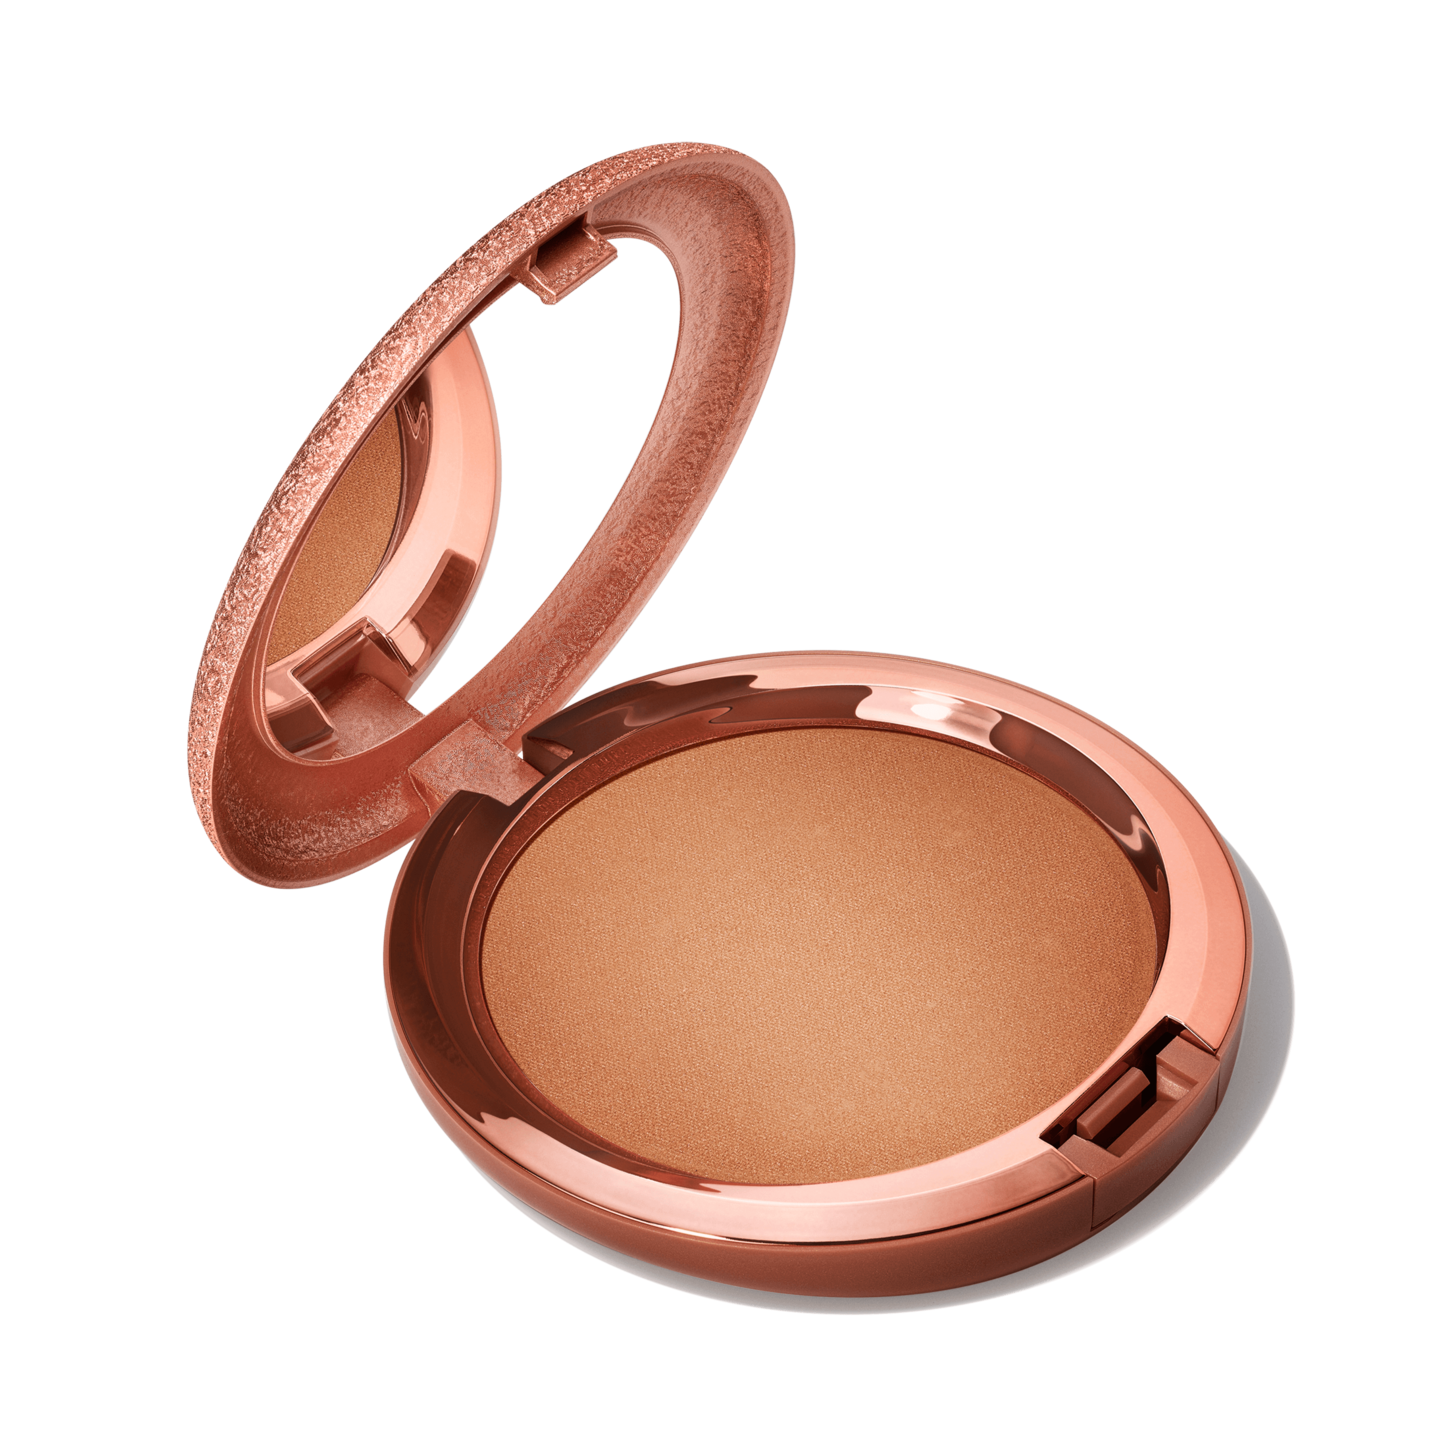 SKINFINISH SUNSTRUCK RADIANT | Cosmetics Official Site